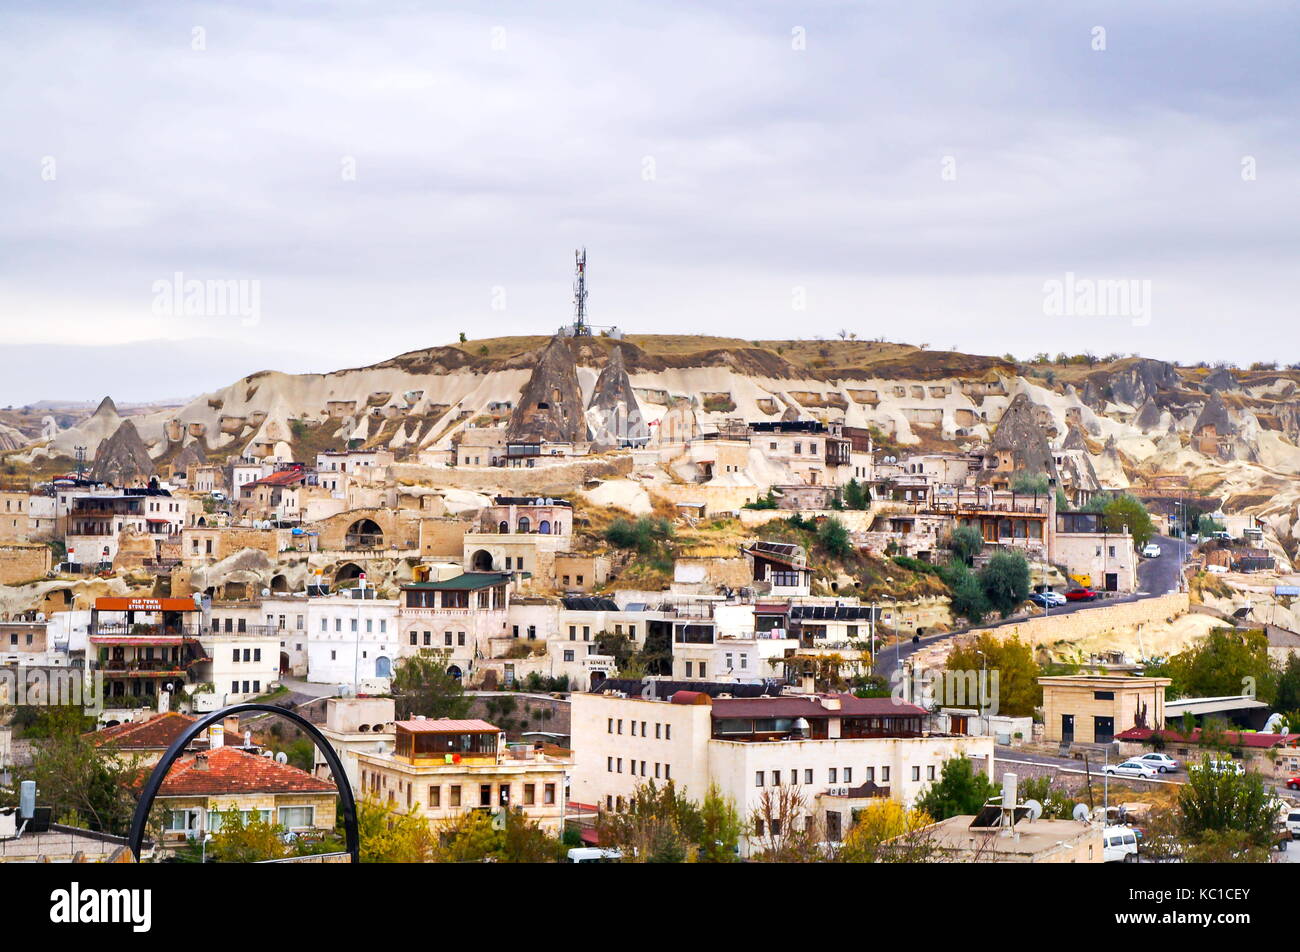 Cappadocia city view with characteristic nature scenery environment Stock Photo